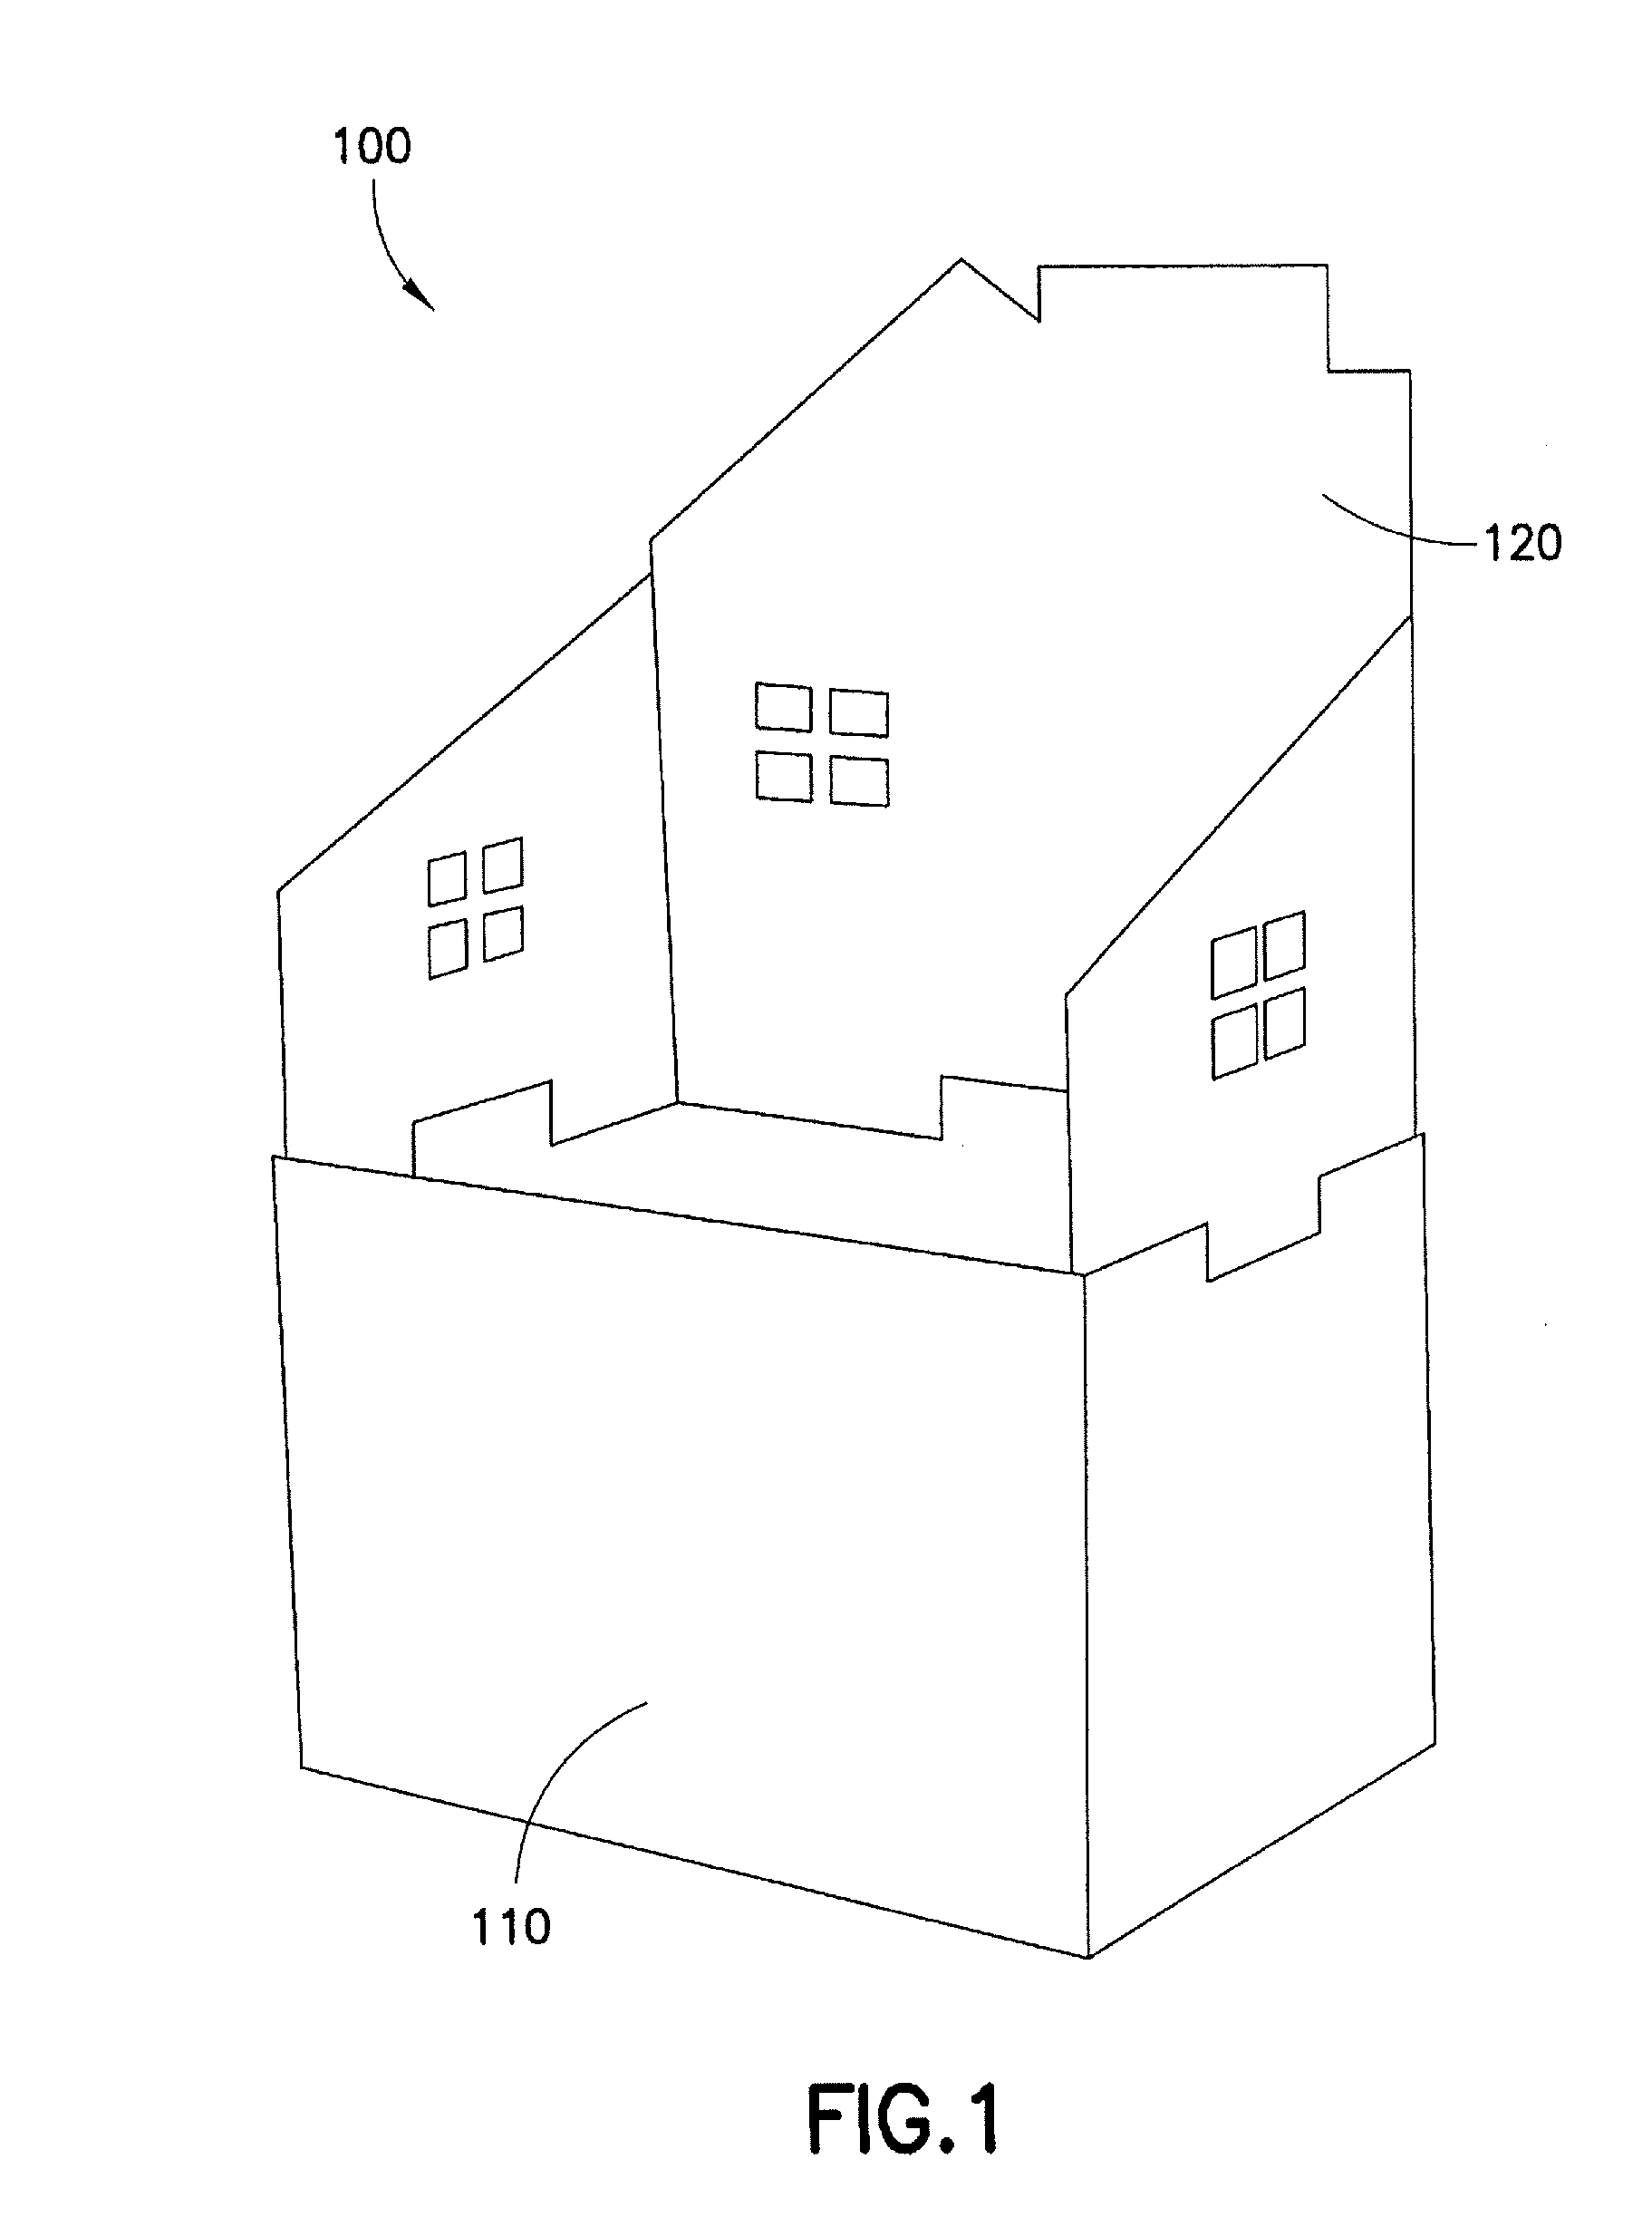 Product display system and method